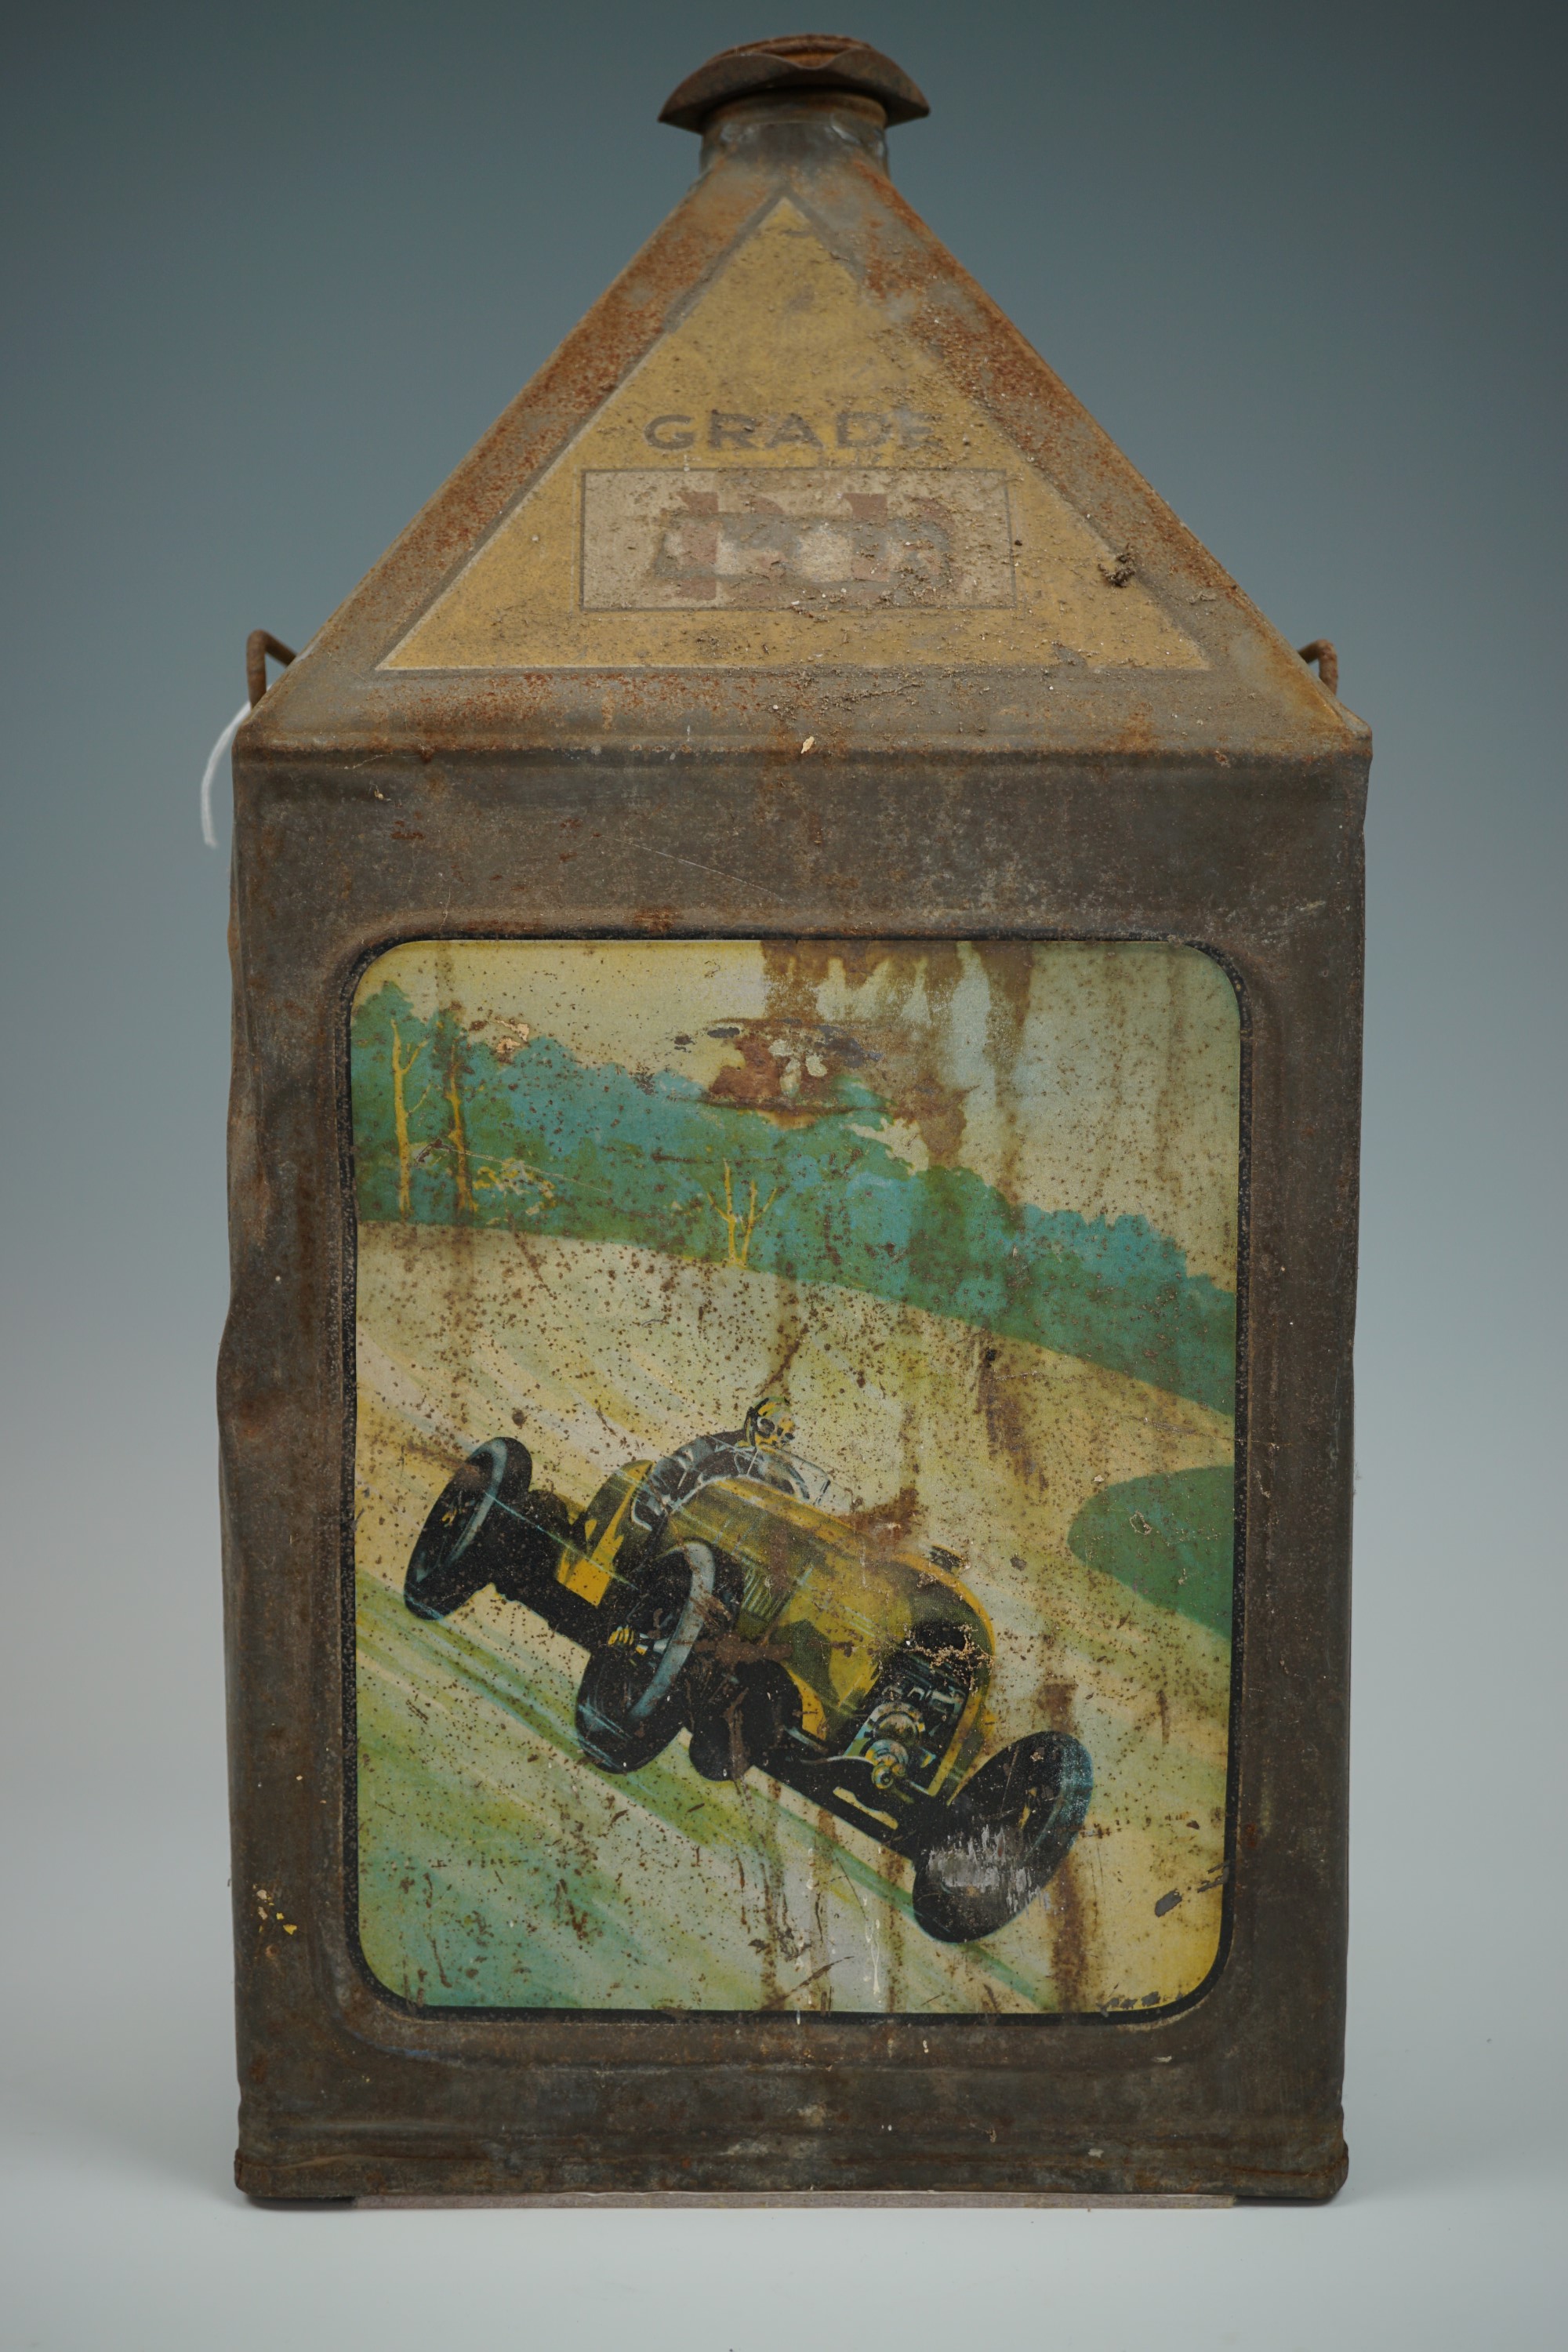 A 1930s Gamages 5-gallon fuel oil can, of so-called "pyramid" form, lithographically printed in